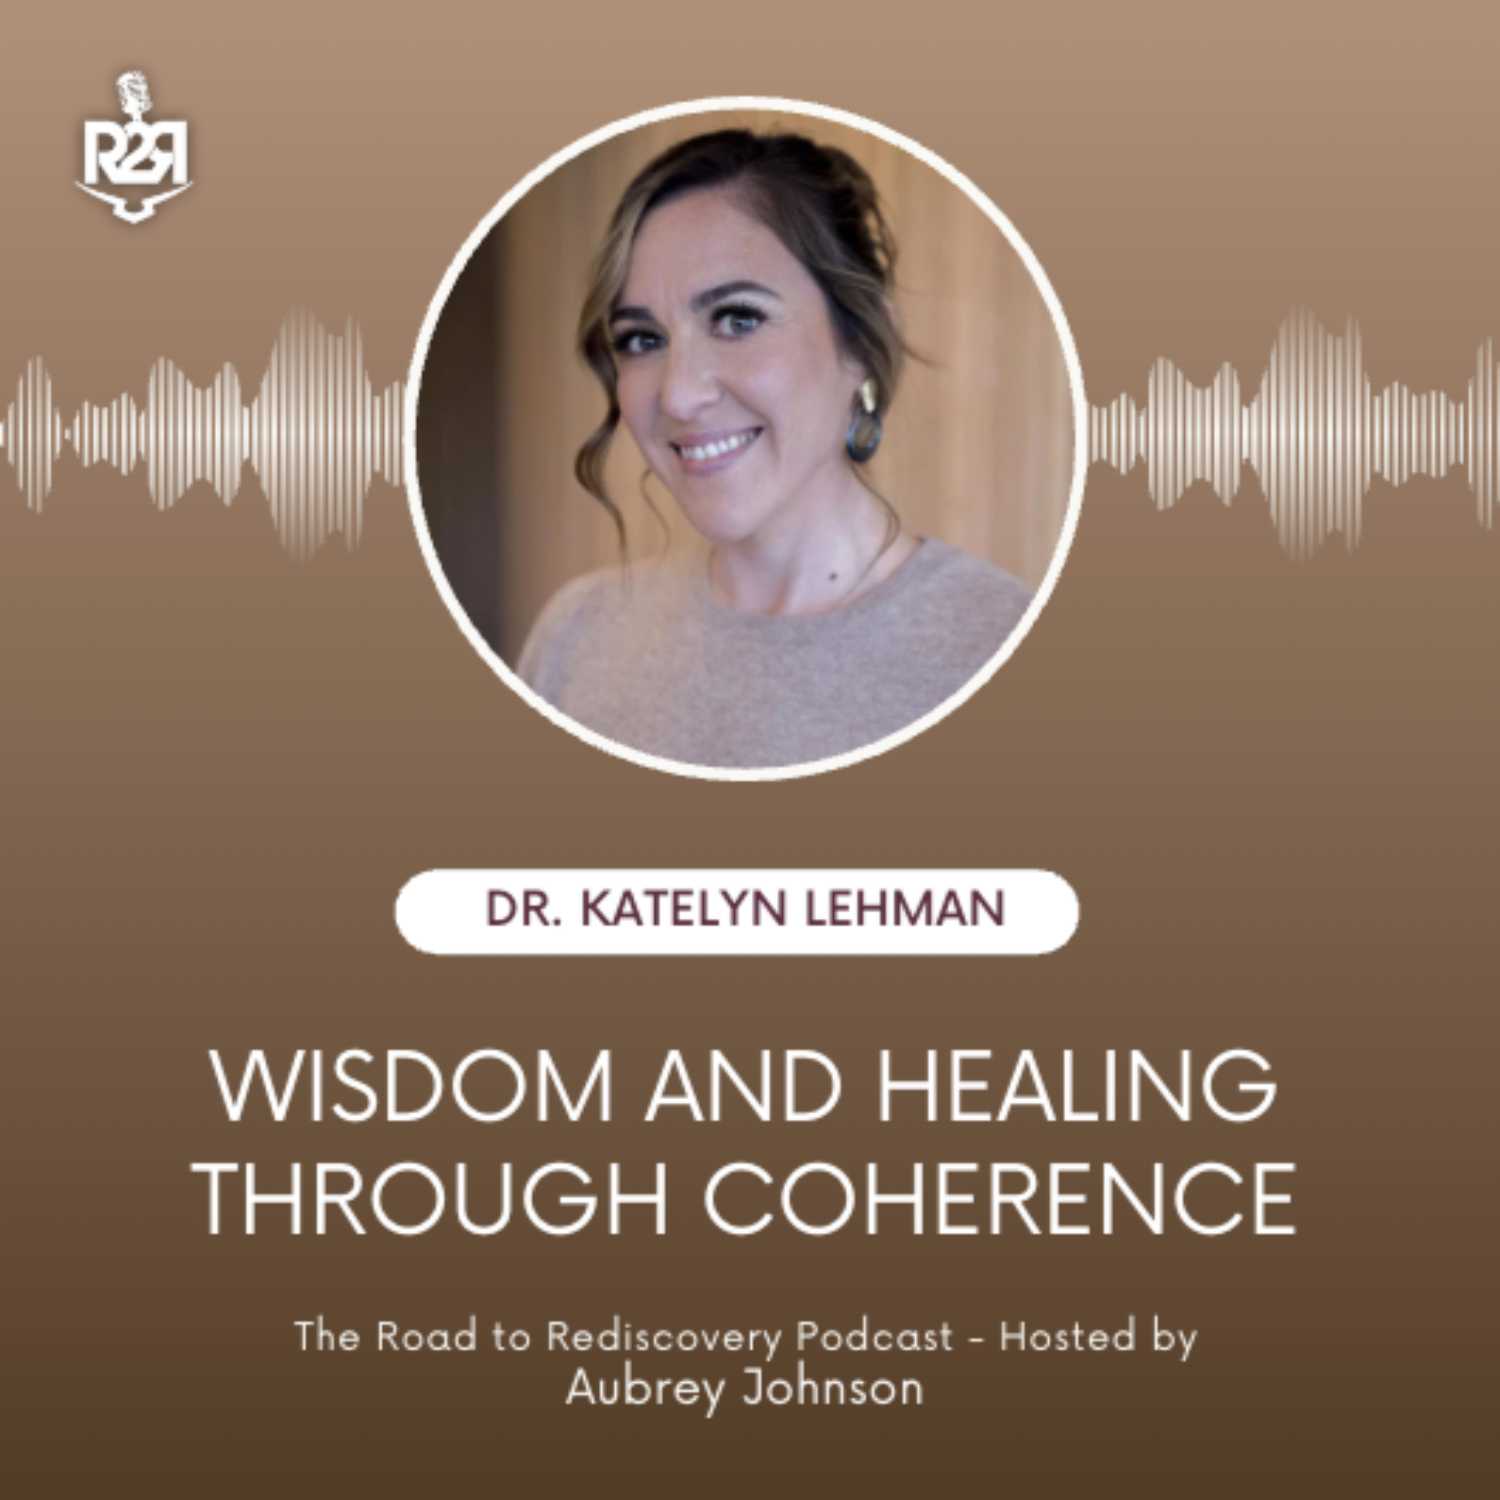 Wisdom and Healing through Coherence - with Dr. Katelyn Lehman